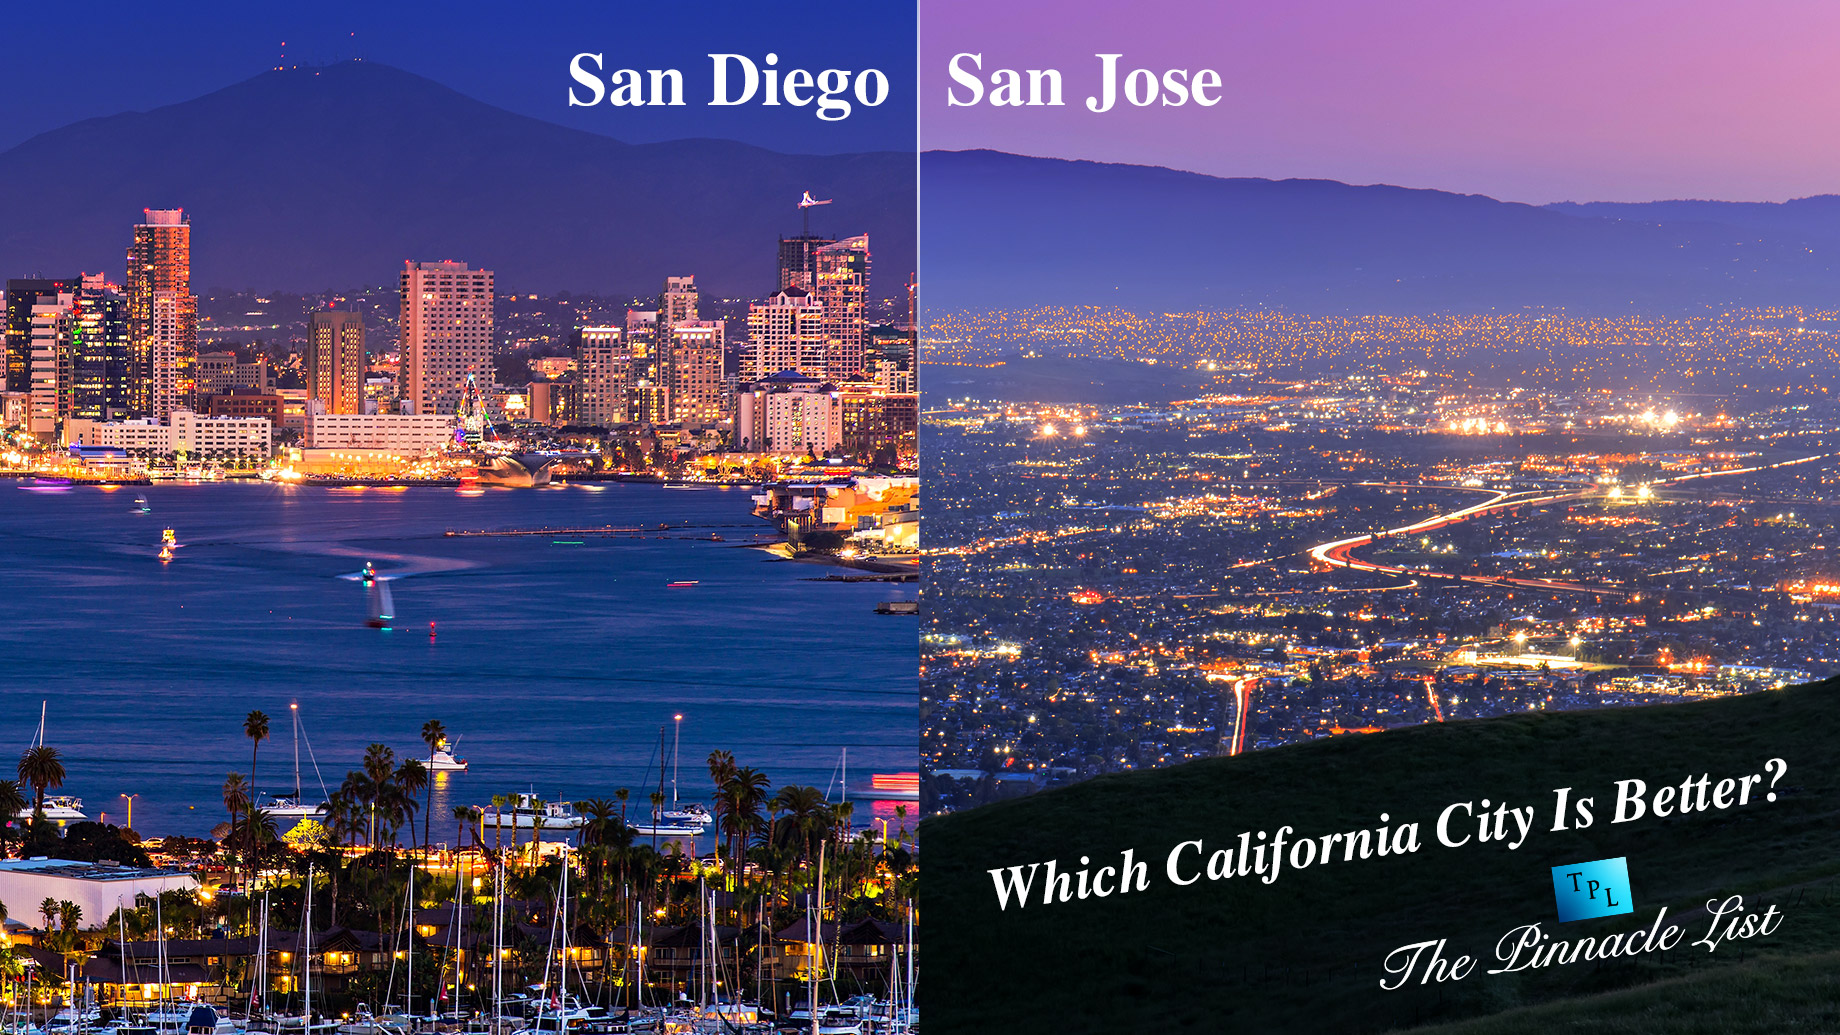 Which California City Is Better - San Diego Or San Jose?